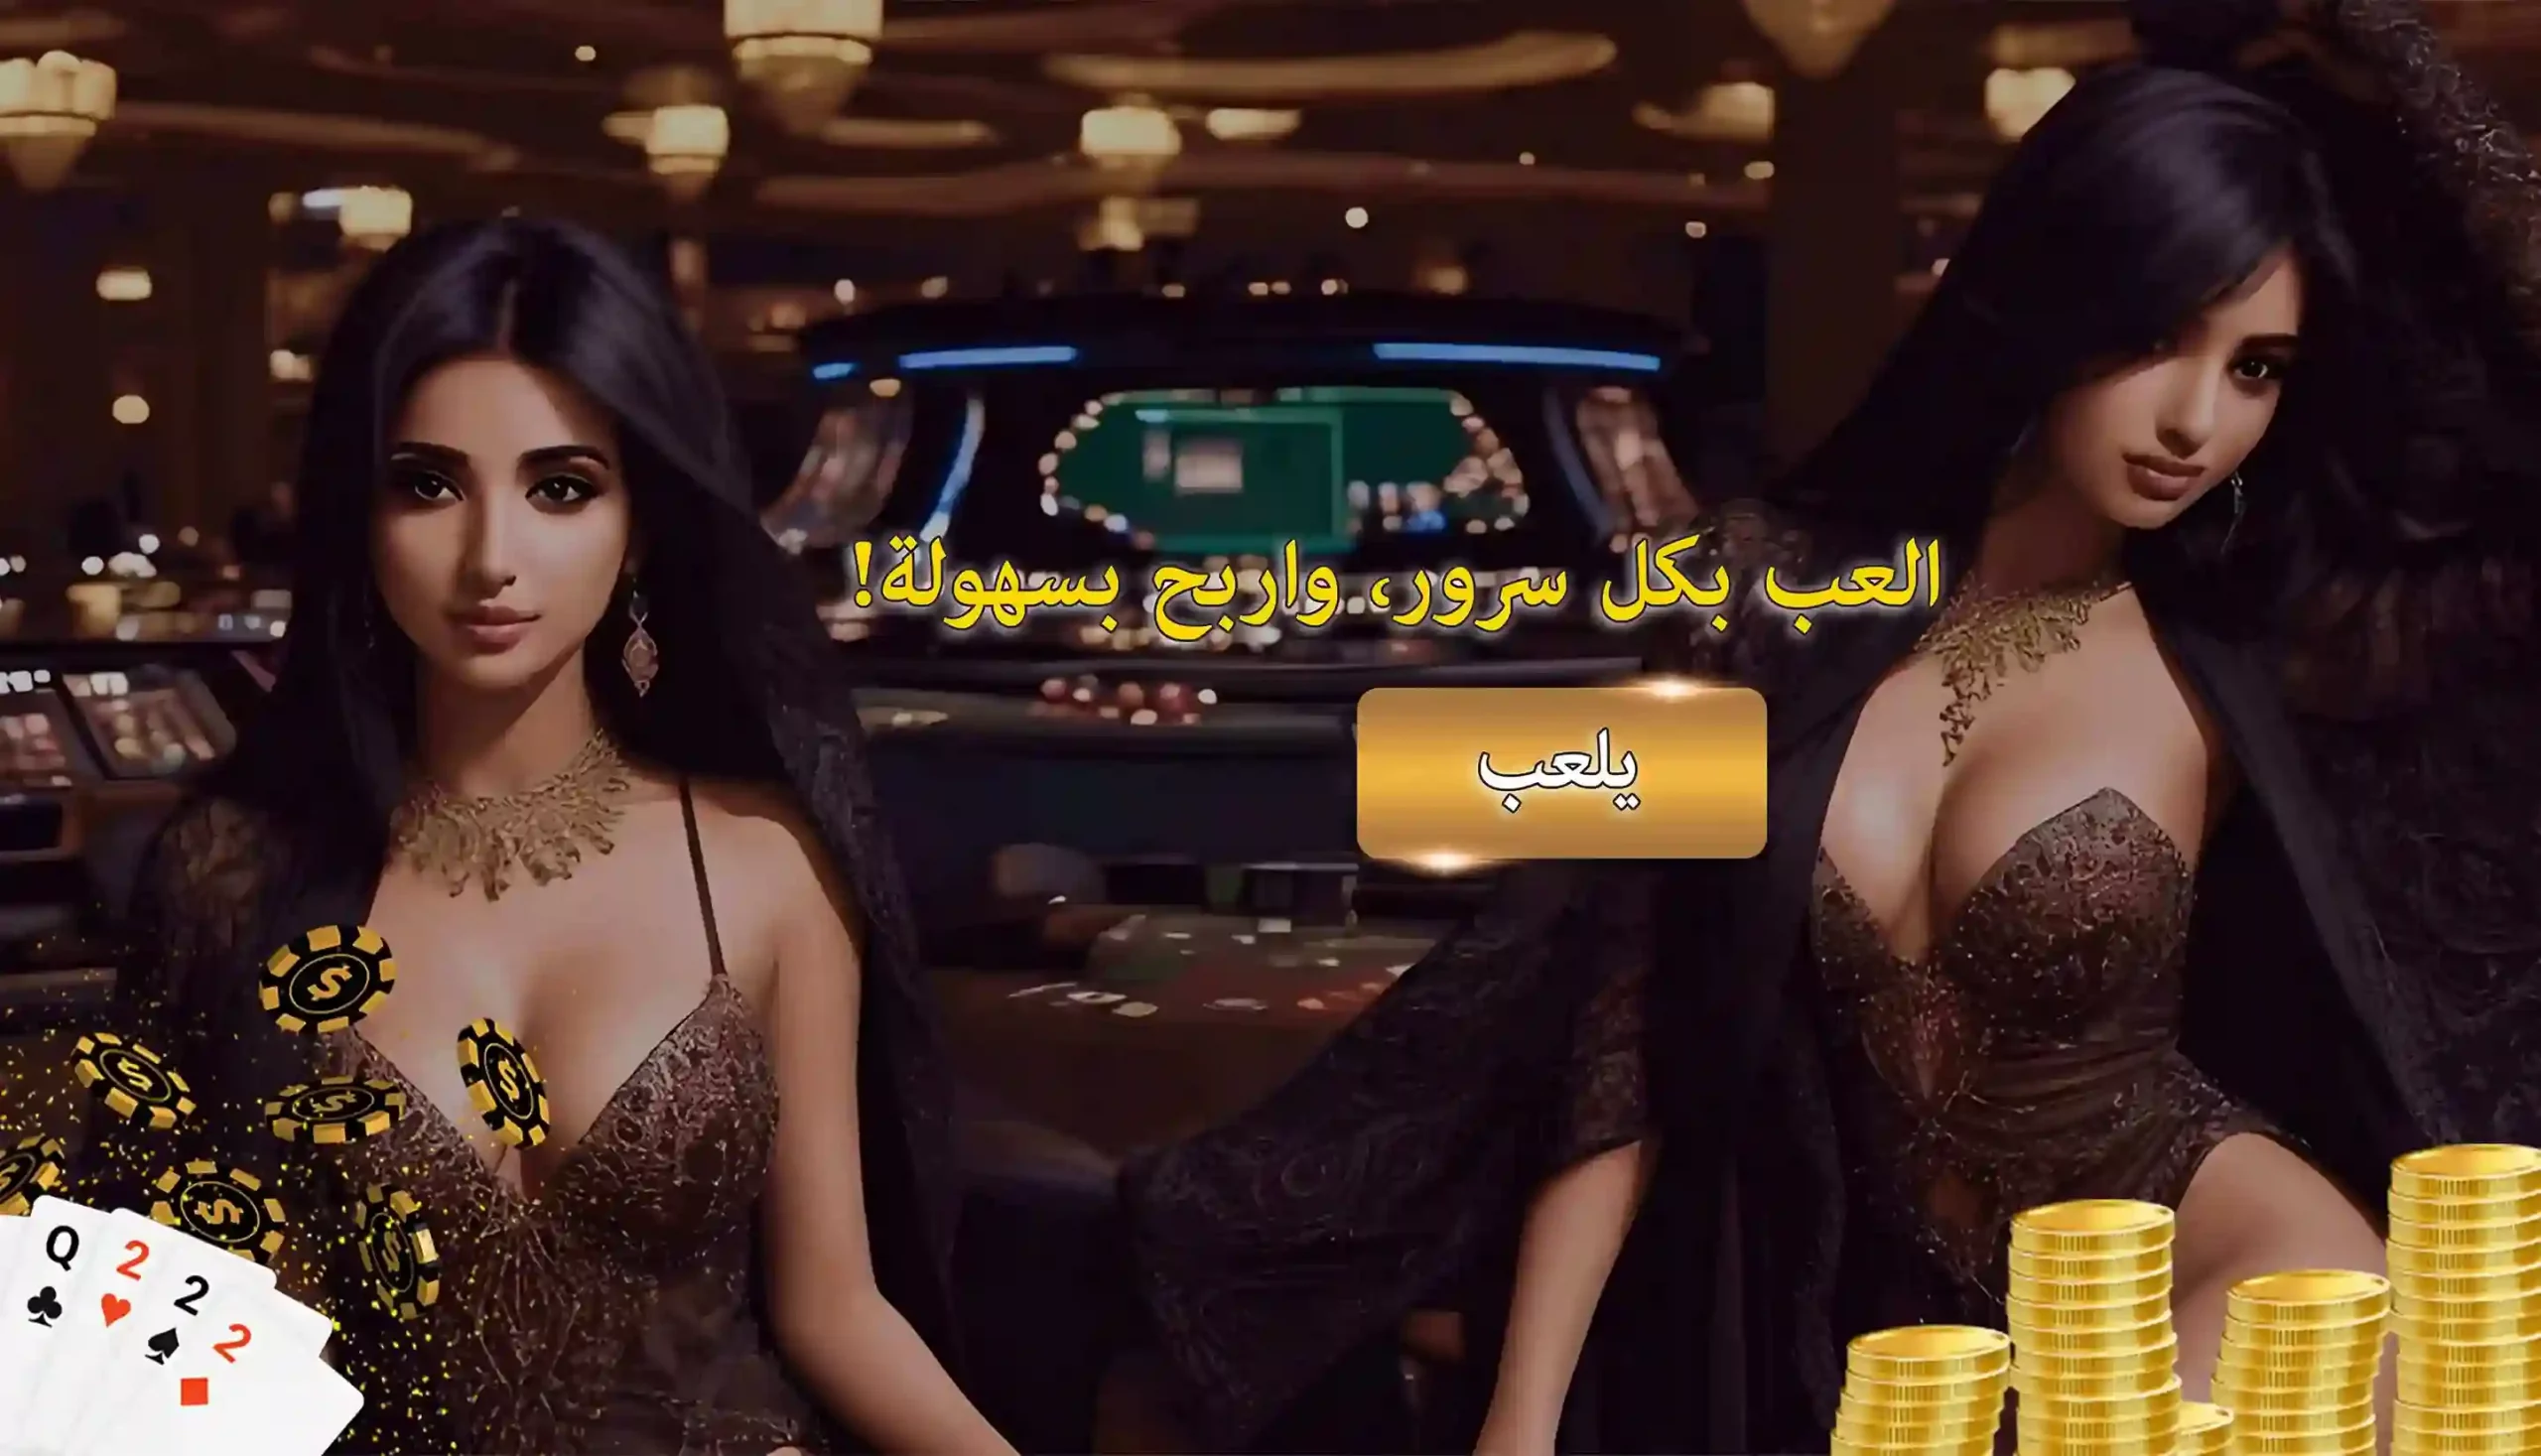 the-picture-shows-beautiful-women-sitting-at-a-table-in-a-casino-playing-baloot